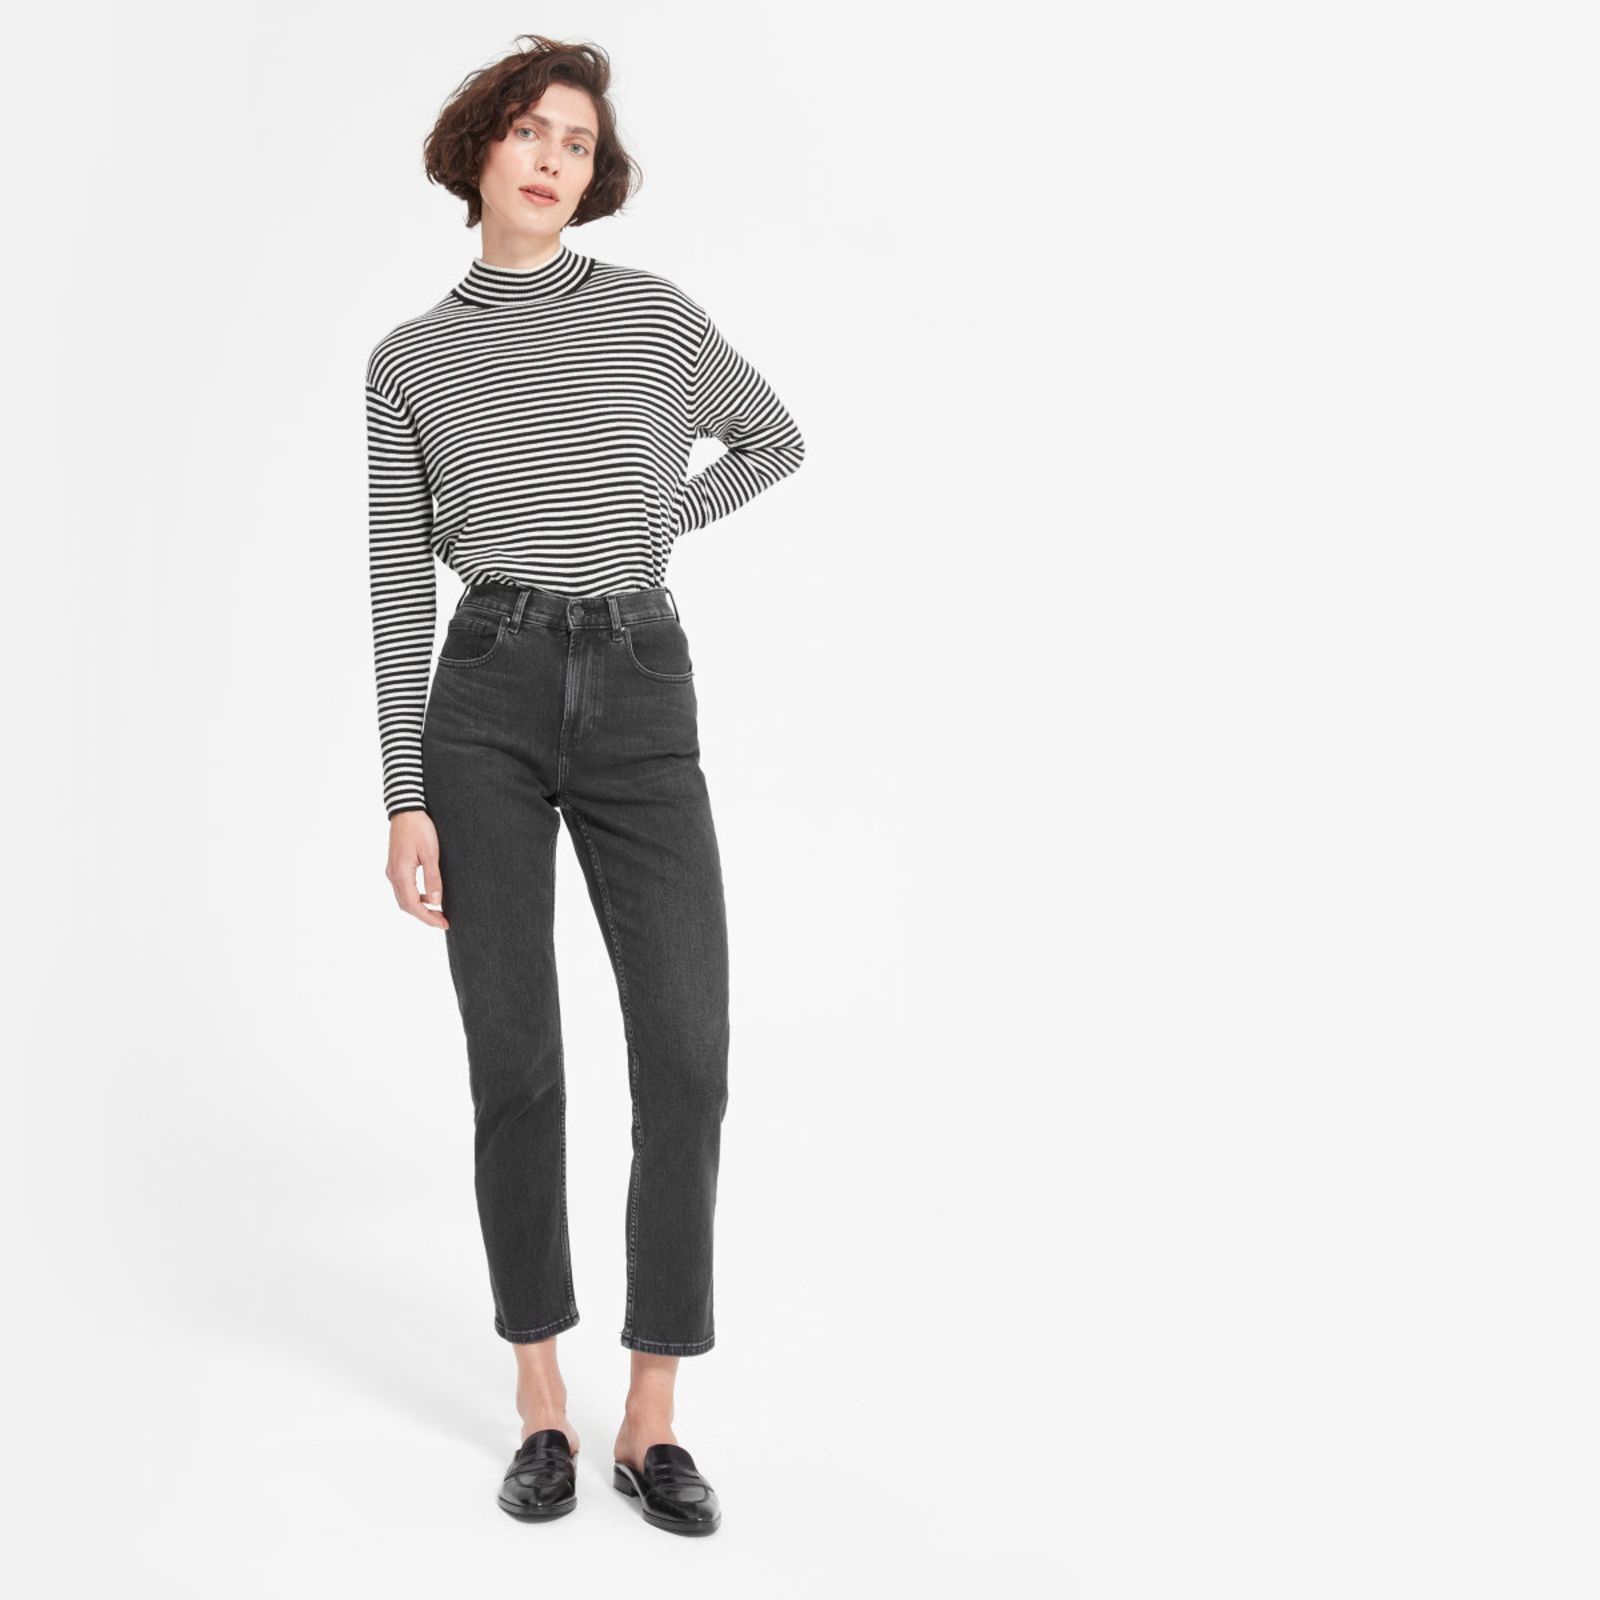 Women's Cheeky Straight Jean by Everlane in Washed Black, Size 26 | Everlane